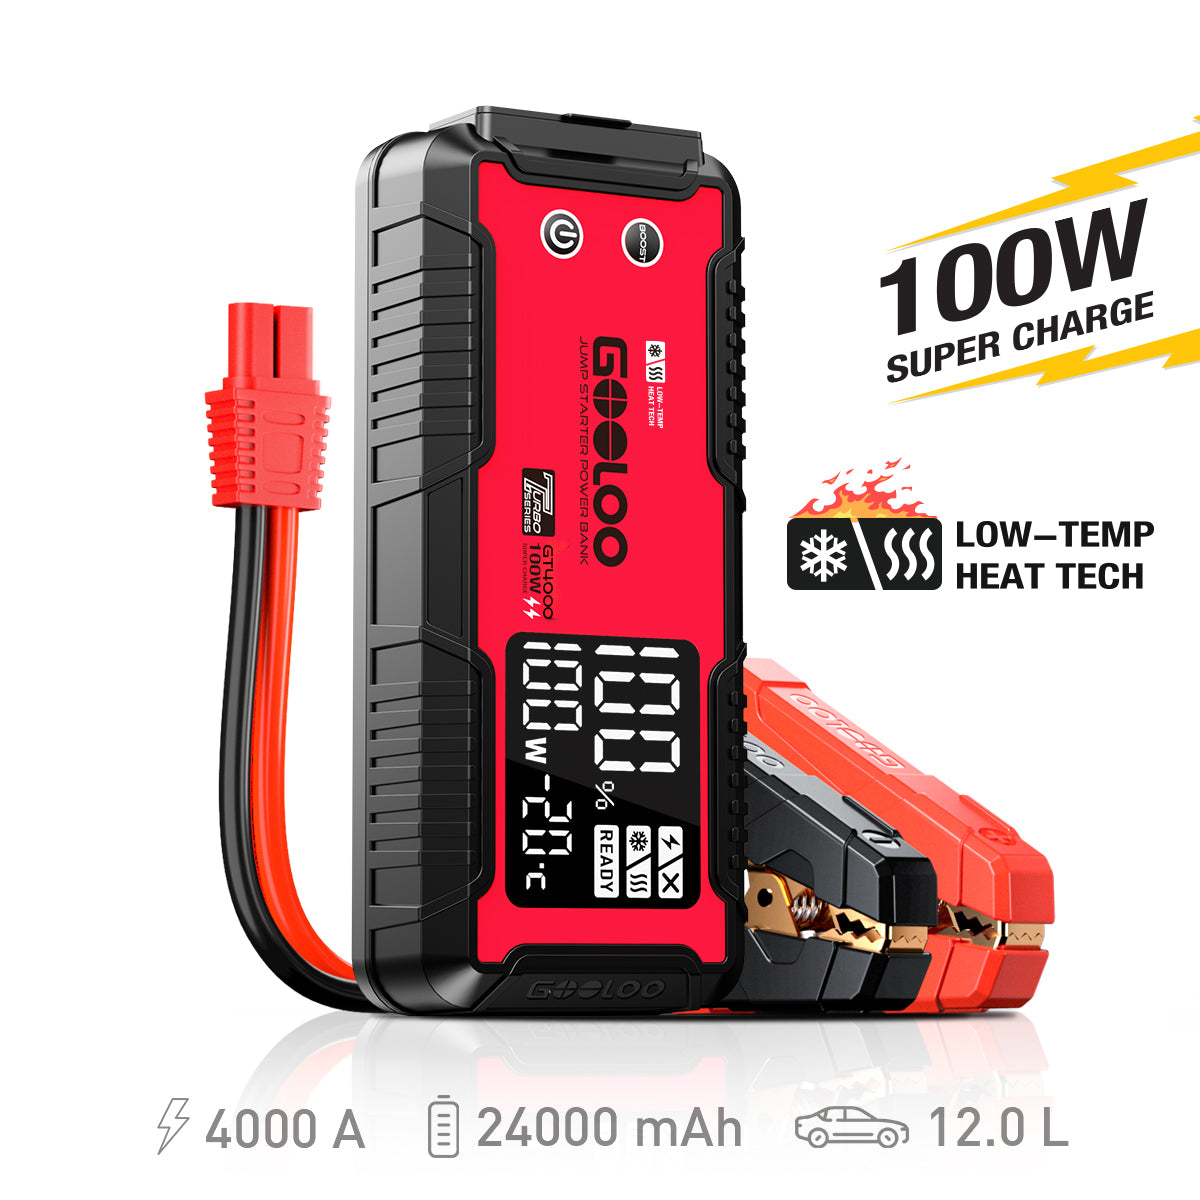 Gooloo GT4000S Jump Starter 26800mAh 4000A Car Starter PD100W Two-Way Fast-Charging Portable Car Battery Charger Booster Pack Up to 10L Diesel and 12L